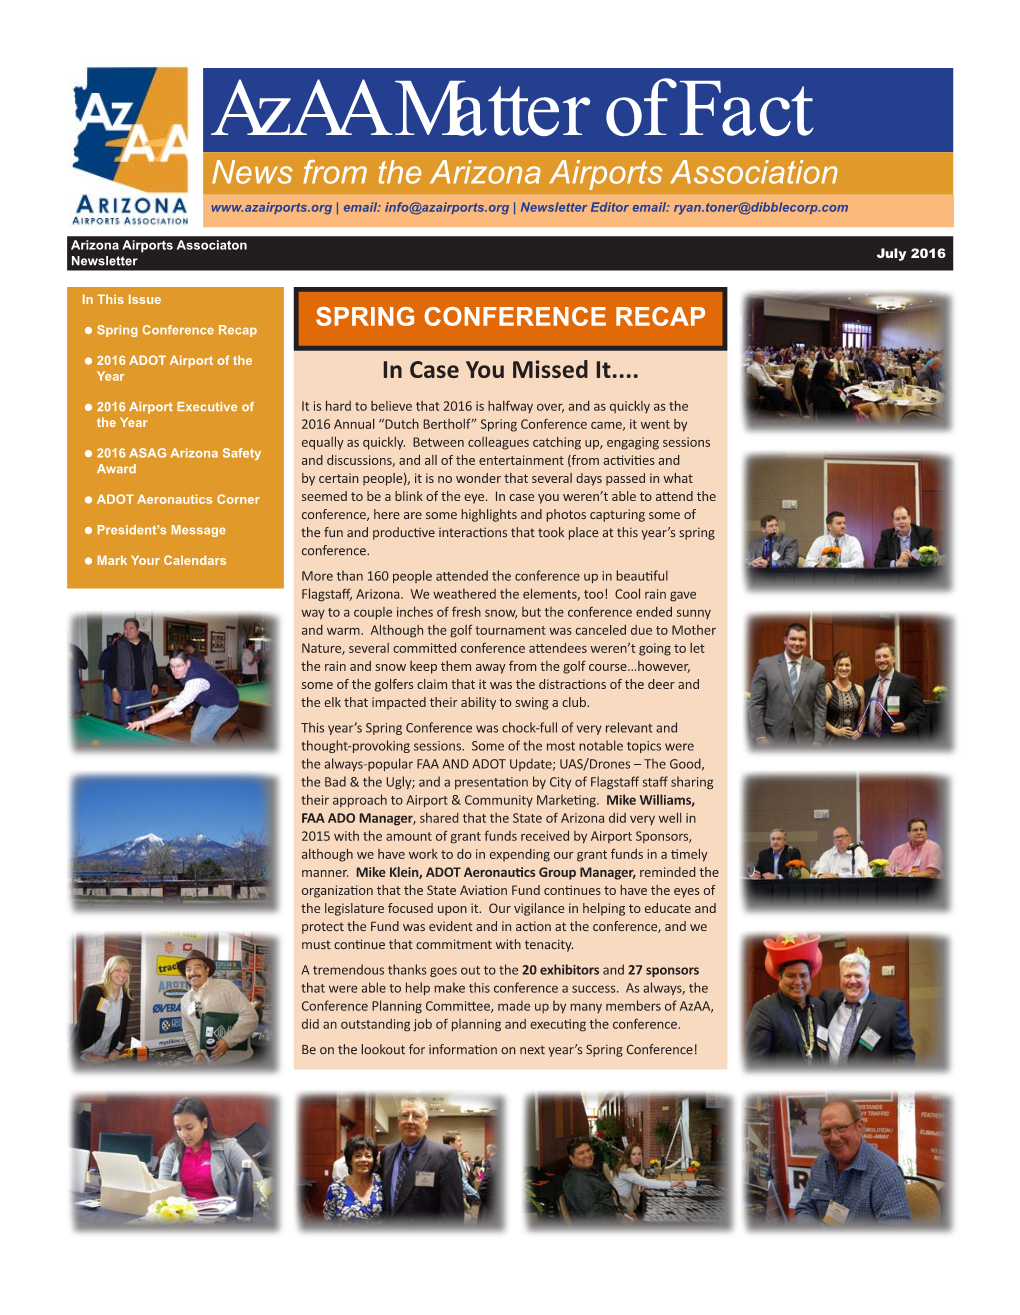 Azaa Matter of Fact News from the Arizona Airports Association | Email: Info@Azairports.Org | Newsletter Editor Email: Ryan.Toner@Dibblecorp.Com